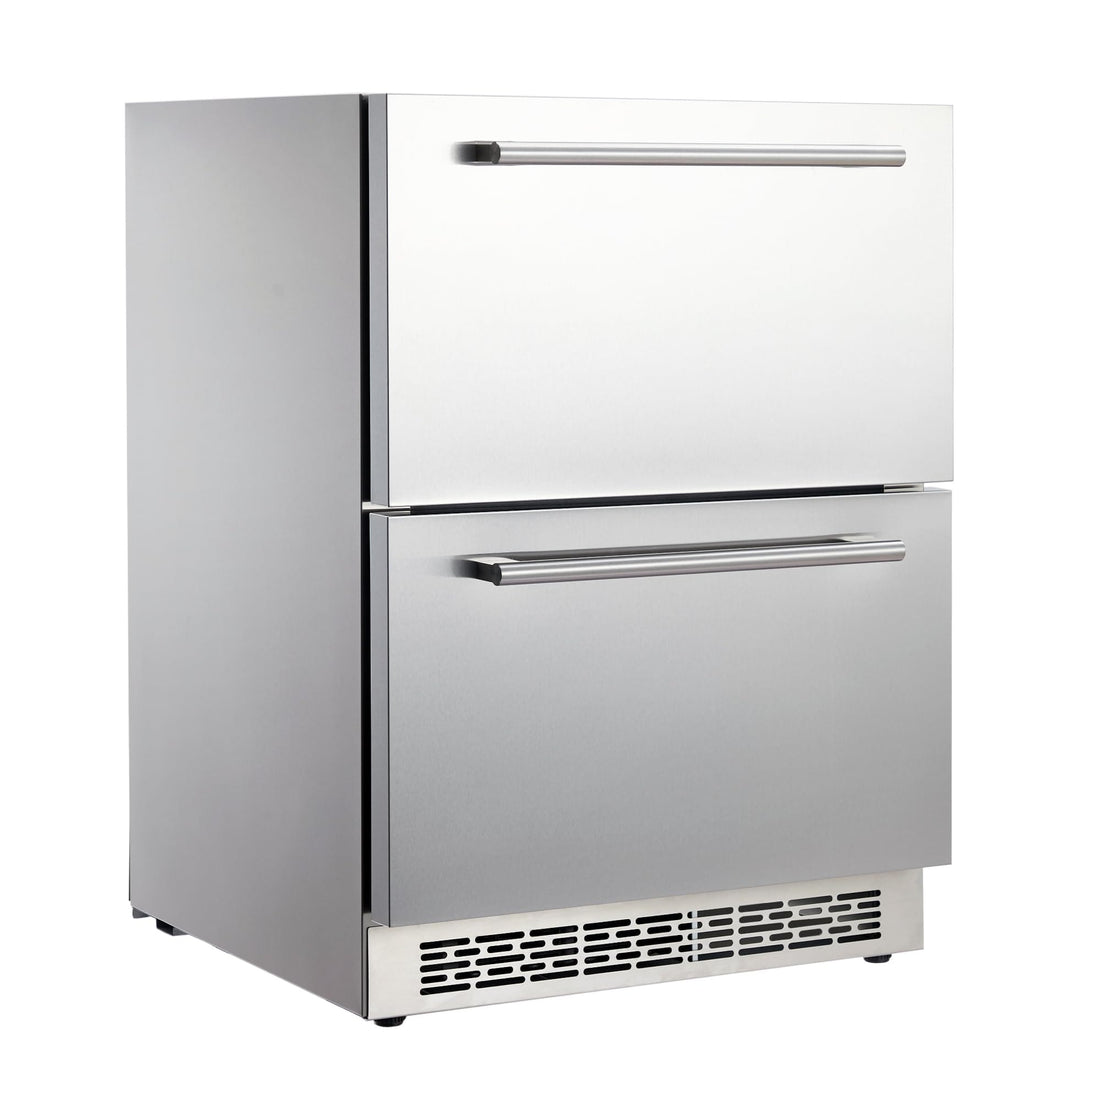 24 inch wide drawer refrigerator, built-in wine, and beverage refrigerator under the counter, weatherproof, Anti-fingerprint, indoor and outdoor refrigerators, all-stainless steel cooler